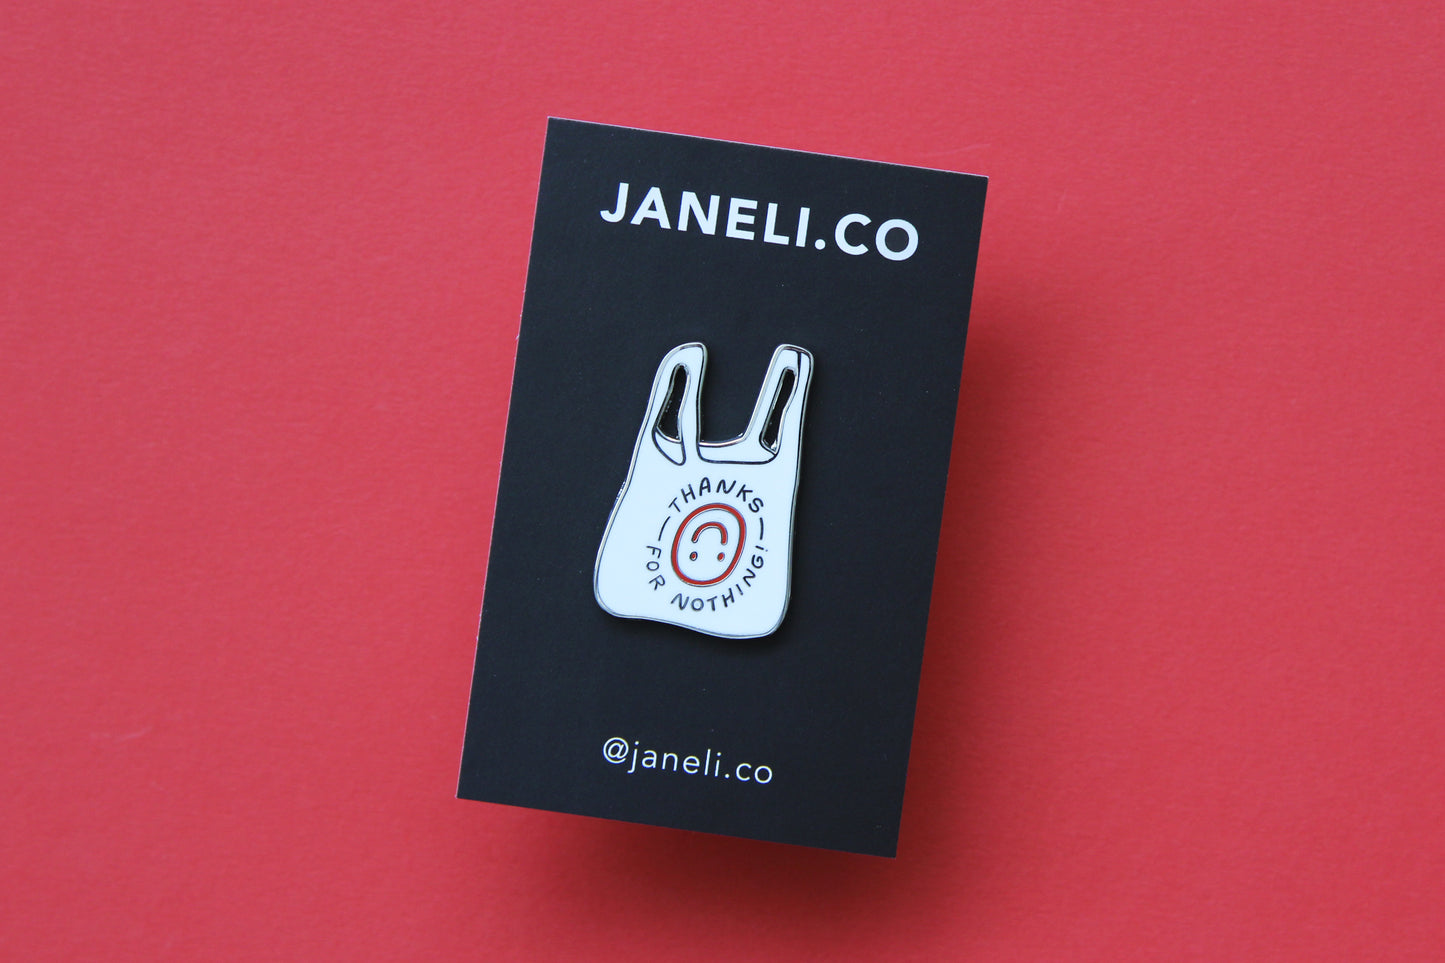 An enamel pin showing a plastic takeout bag that says "Thanks for nothing" with an upside down smiley face on a black JaneLi.Co backing card over a red background.